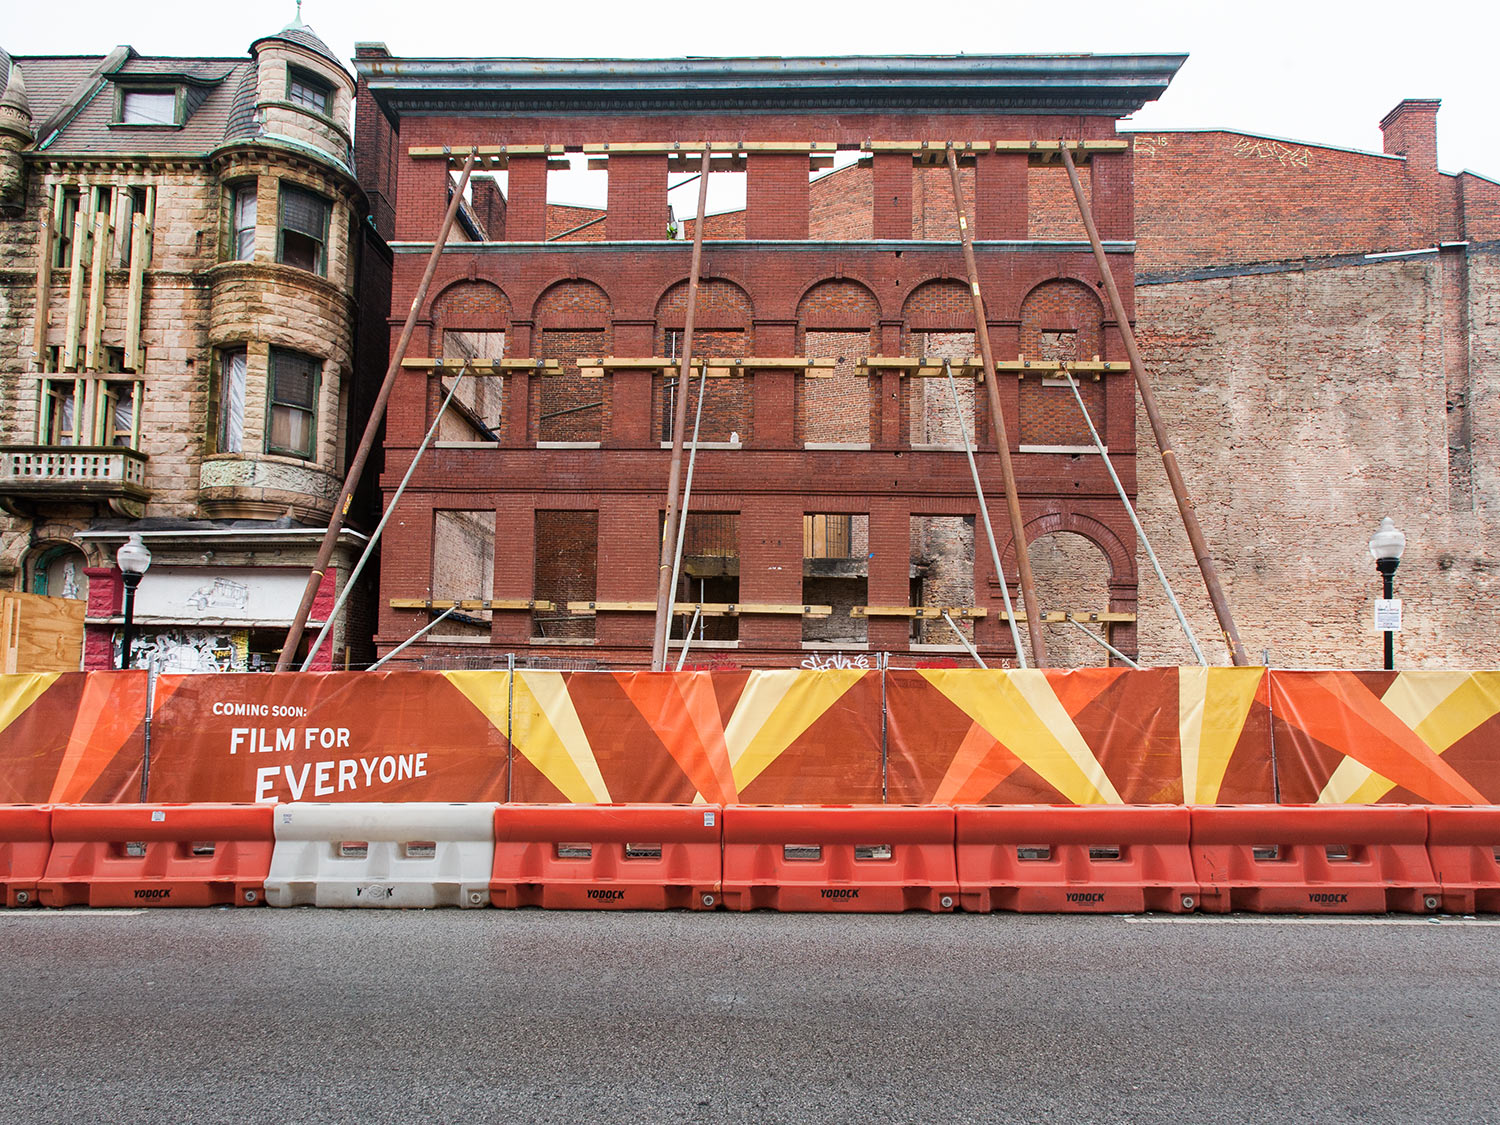 Construction fencing surrounding the Parkway Theatre in Baltimore during its renovation by the Maryland Film Festival